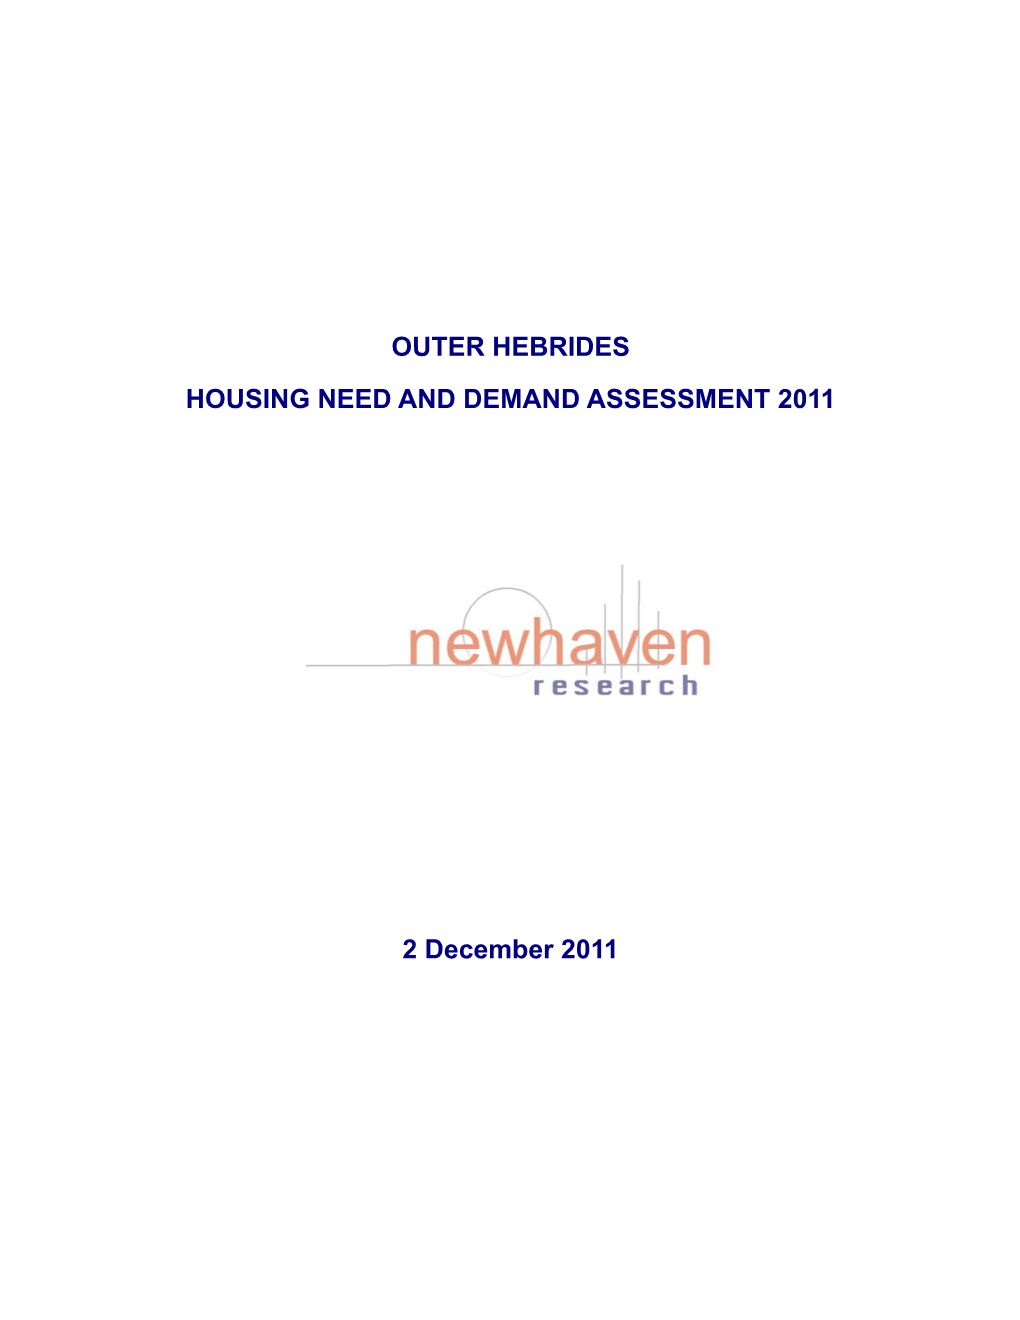 Outer Hebrides Housing Need and Demand Assessment 2011